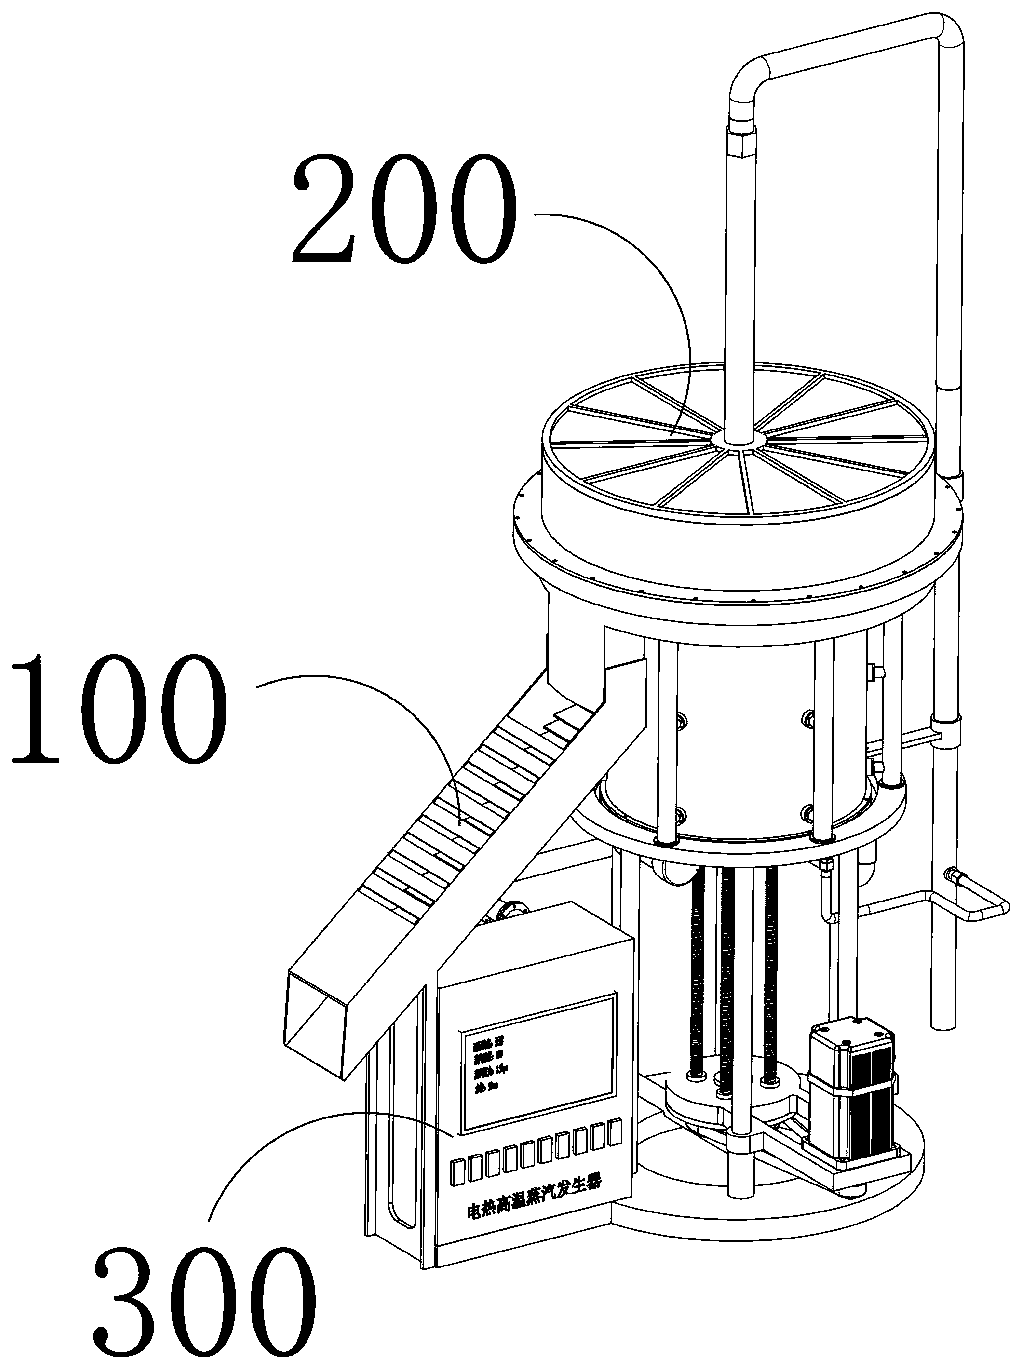 Method for alcohol distillation and extraction on fermented wine material